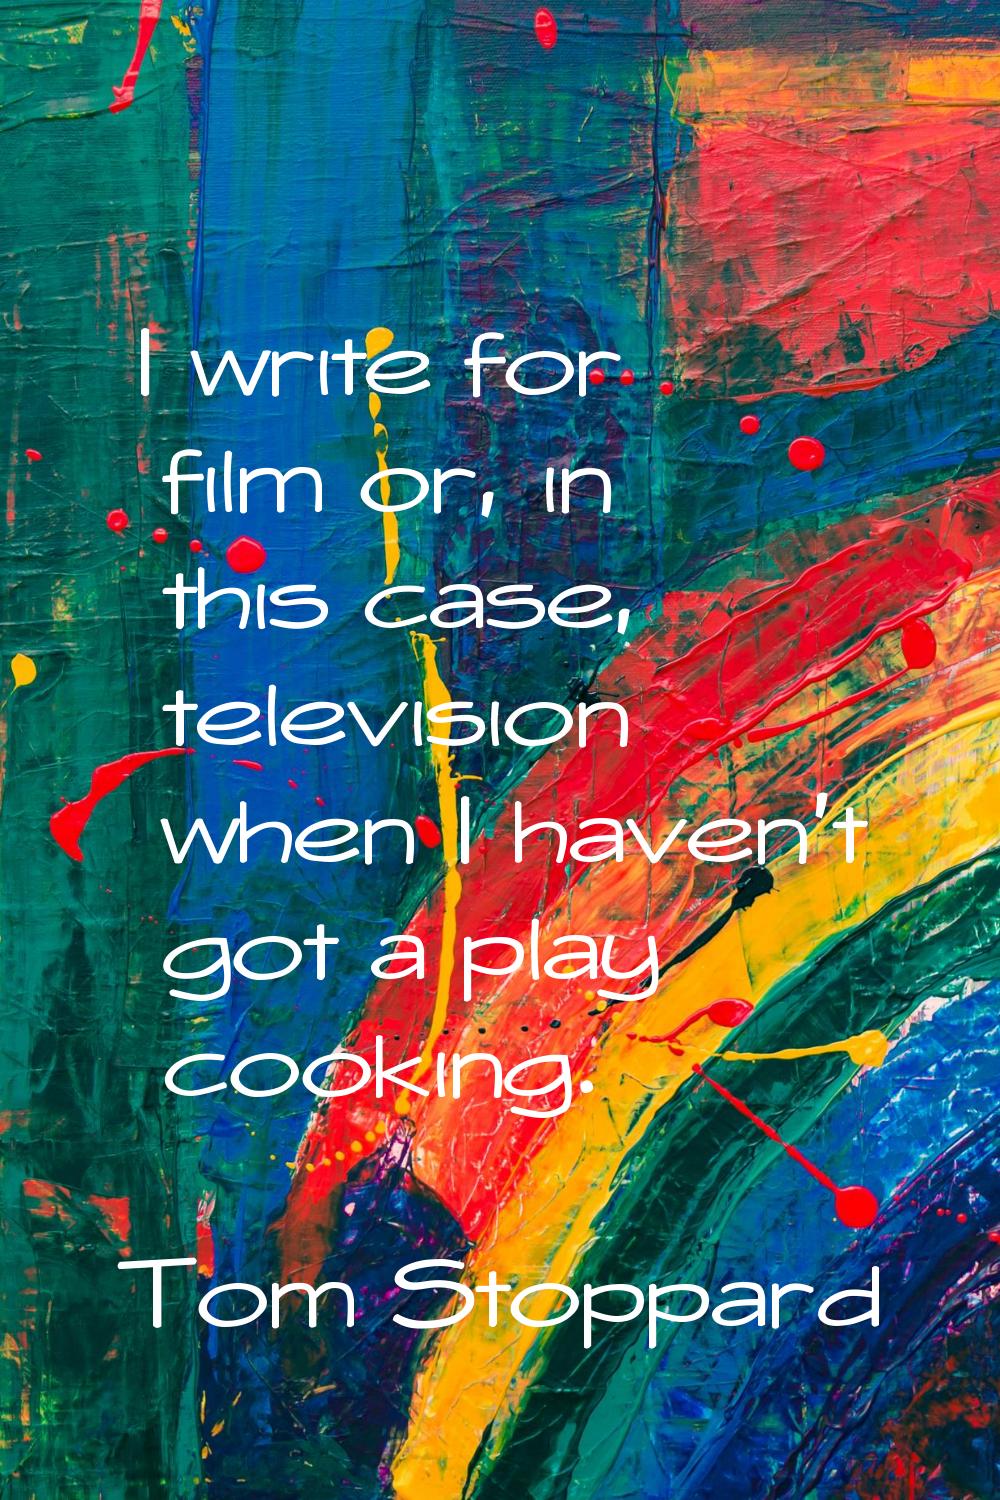 I write for film or, in this case, television when I haven't got a play cooking.